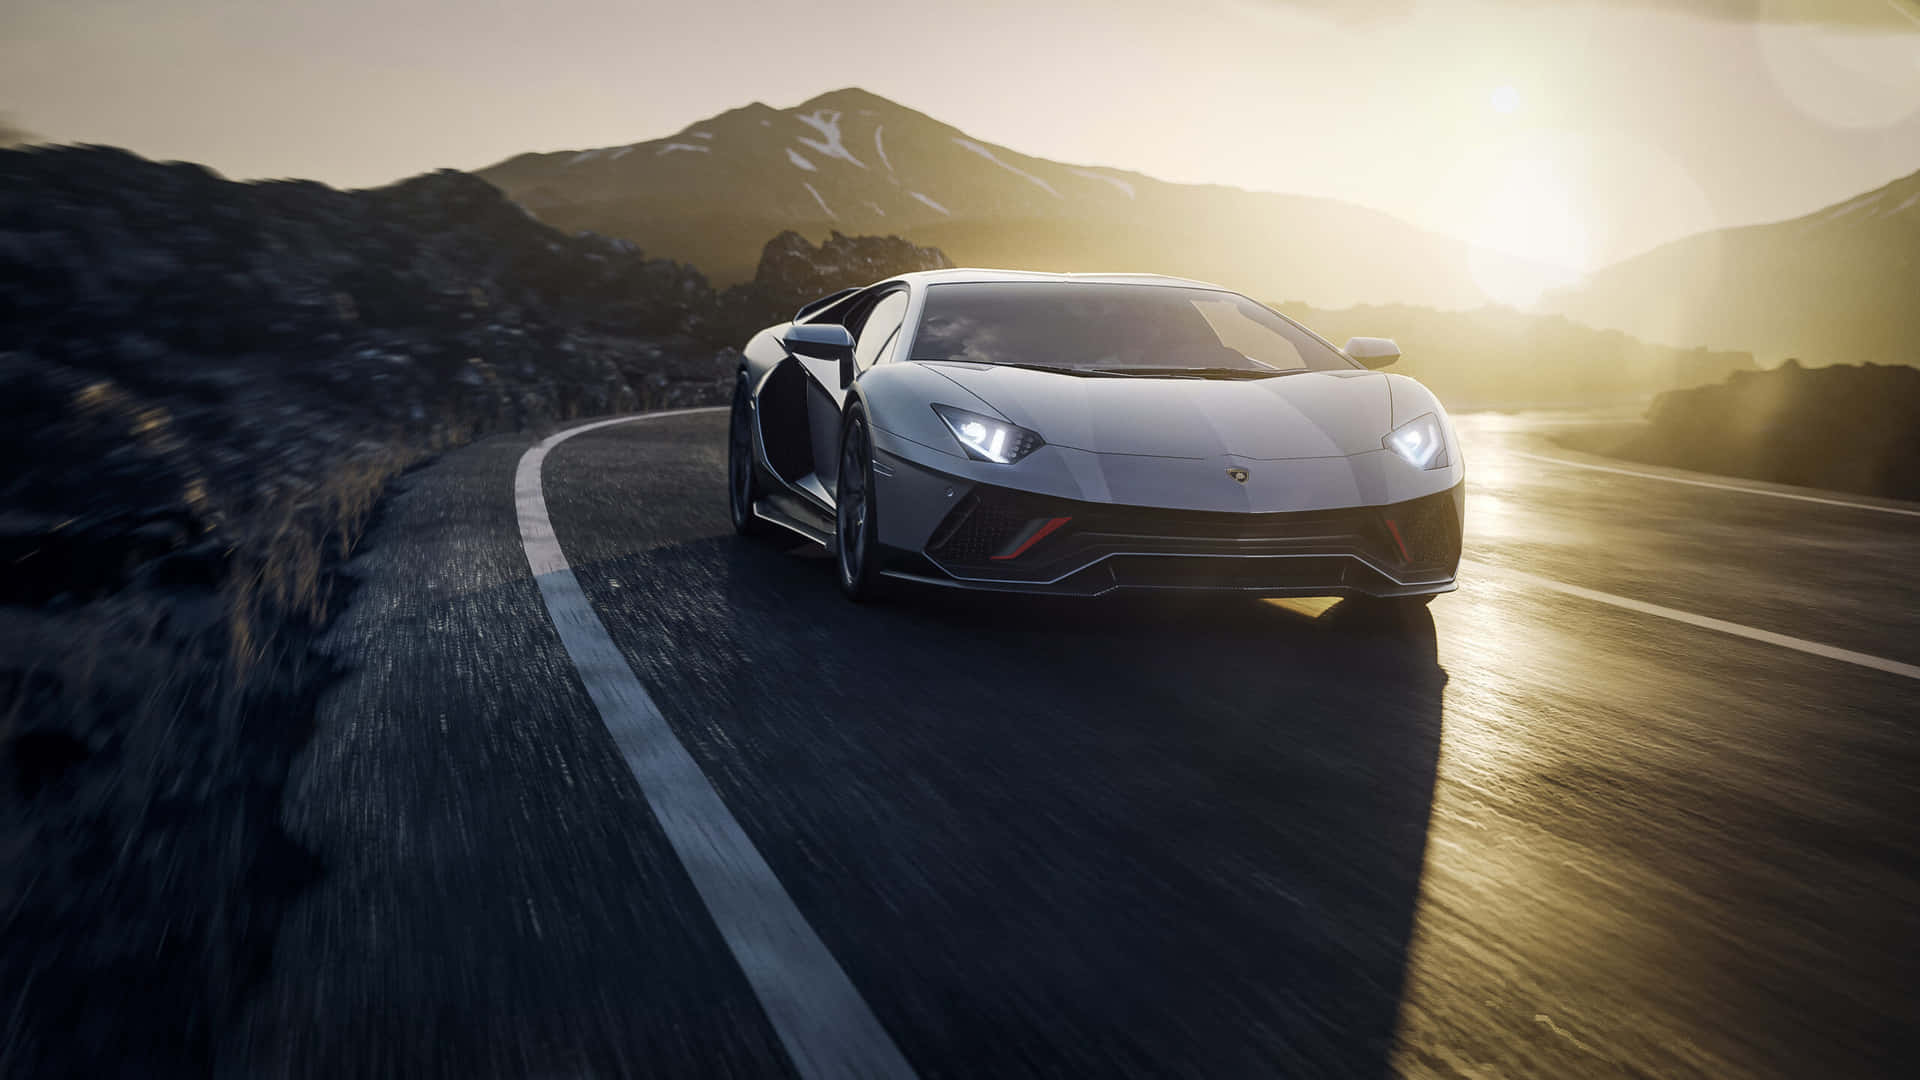 High-Performance Driving Excellence From Lamborghini